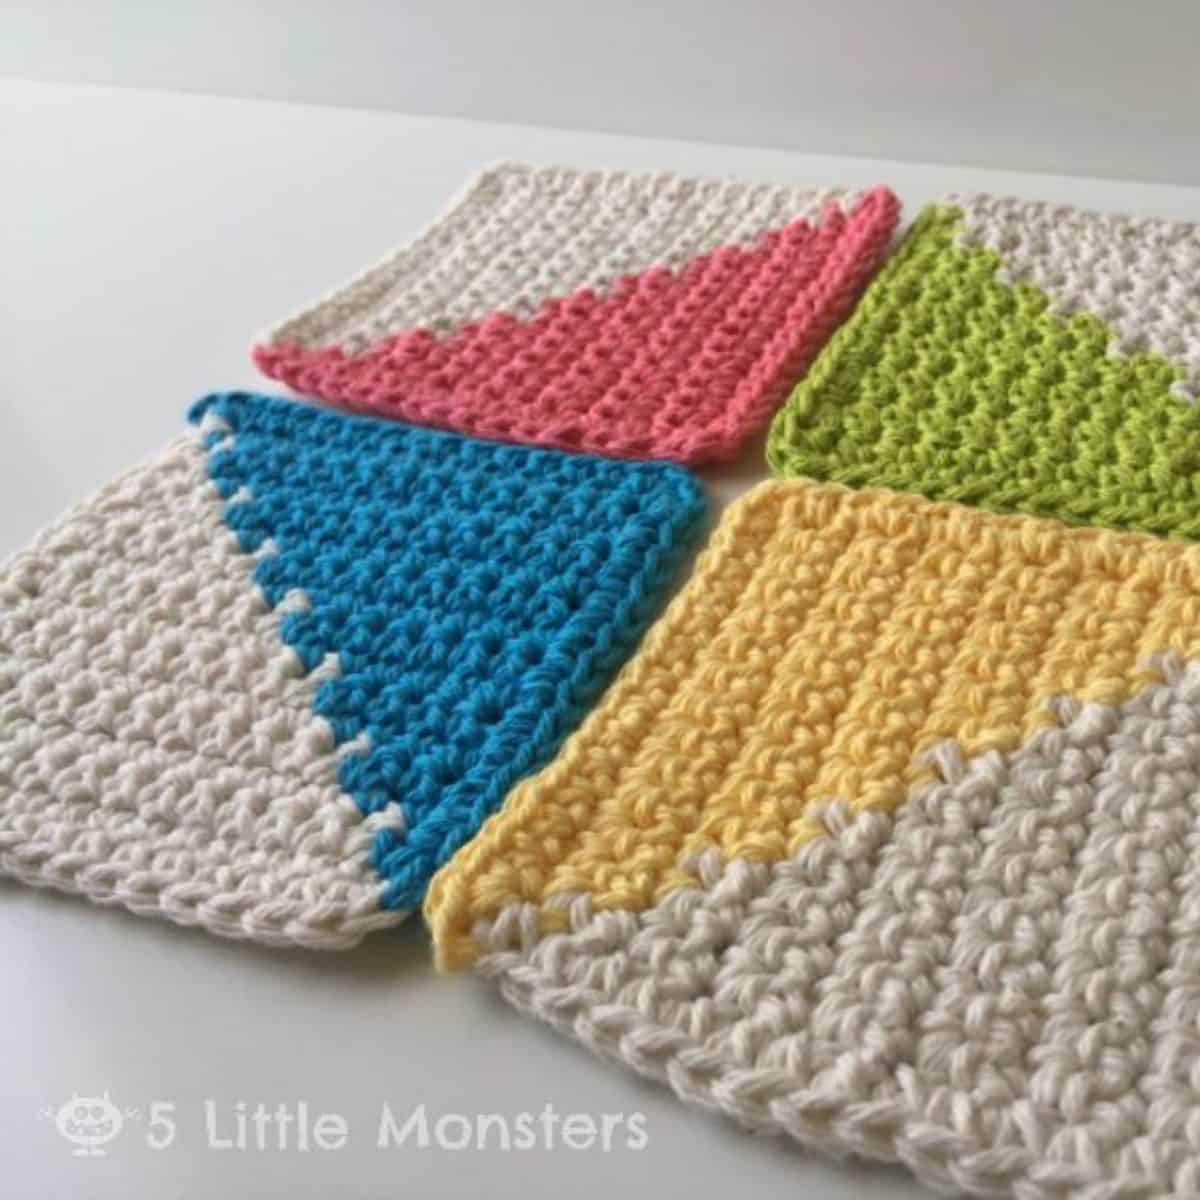 4 crocheted coasters with half of each coaster using colorful yarn and half using neutral yarn